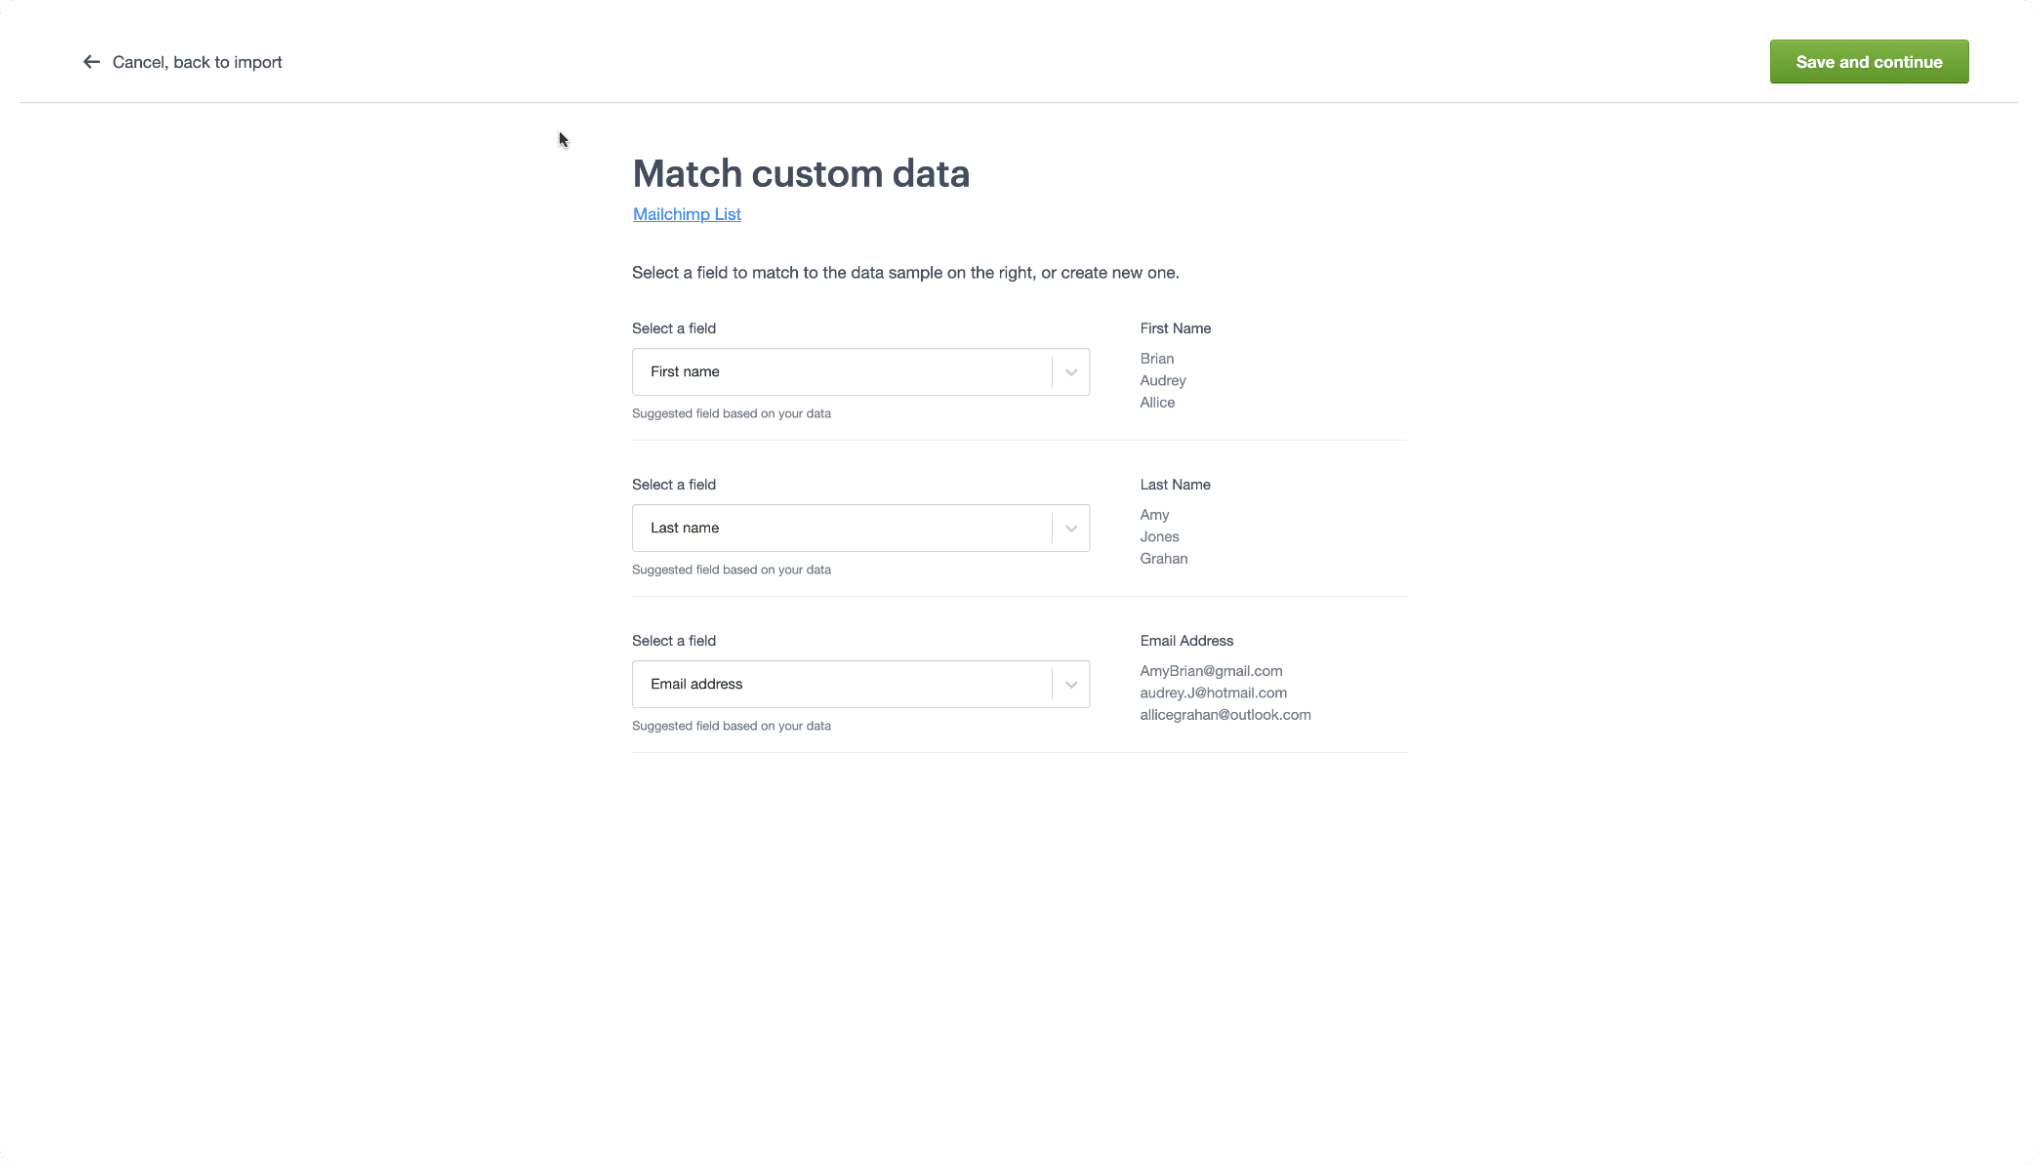 Matching audience data in Campaign Monitor